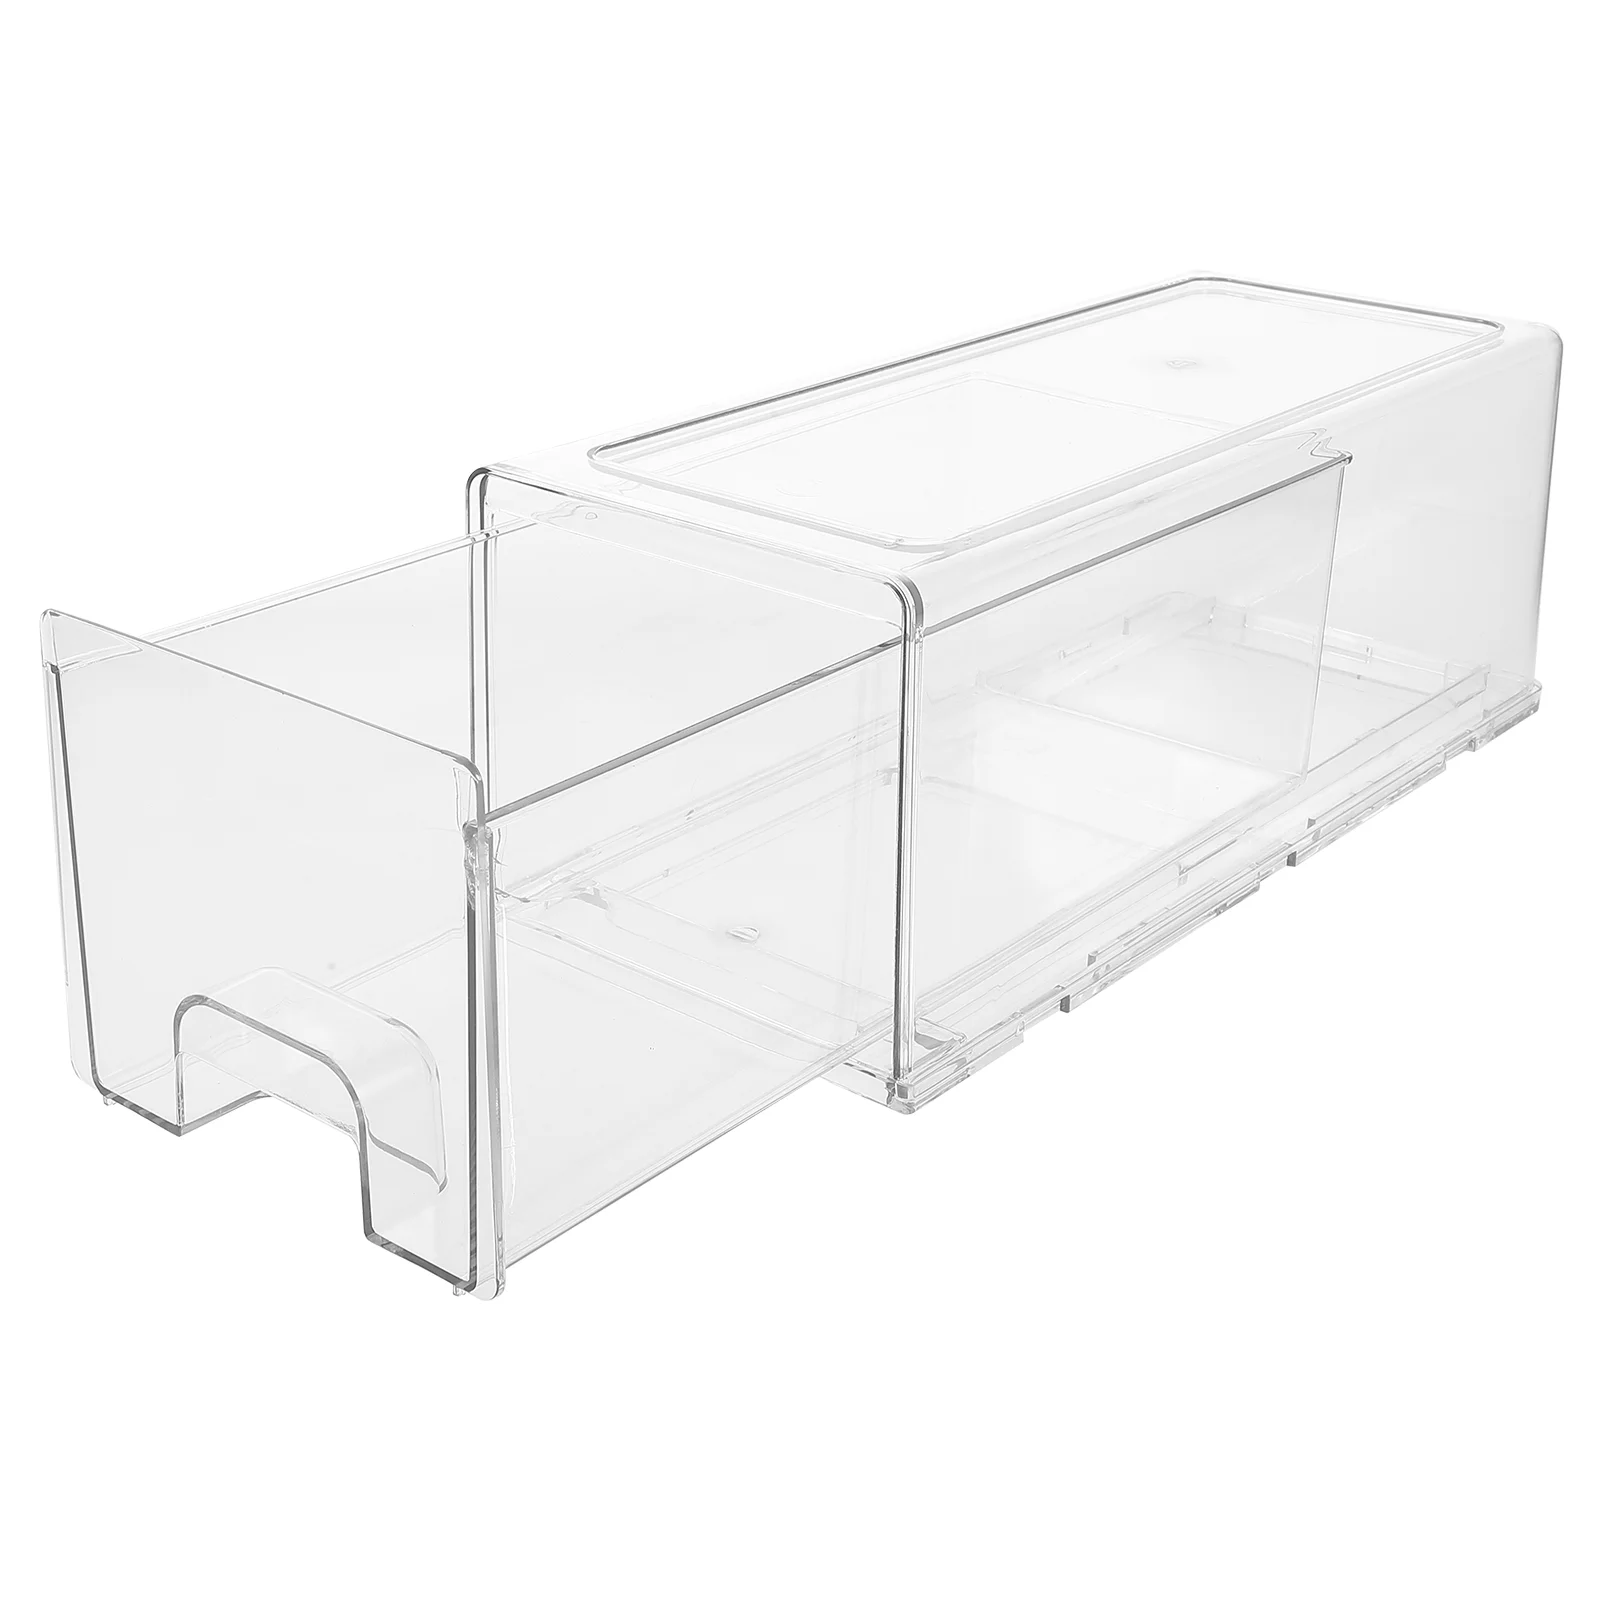 

Drawer Storage Box Drawers Multi-function Desk Organizer Practical Desktop Containers with Bins for Plastic